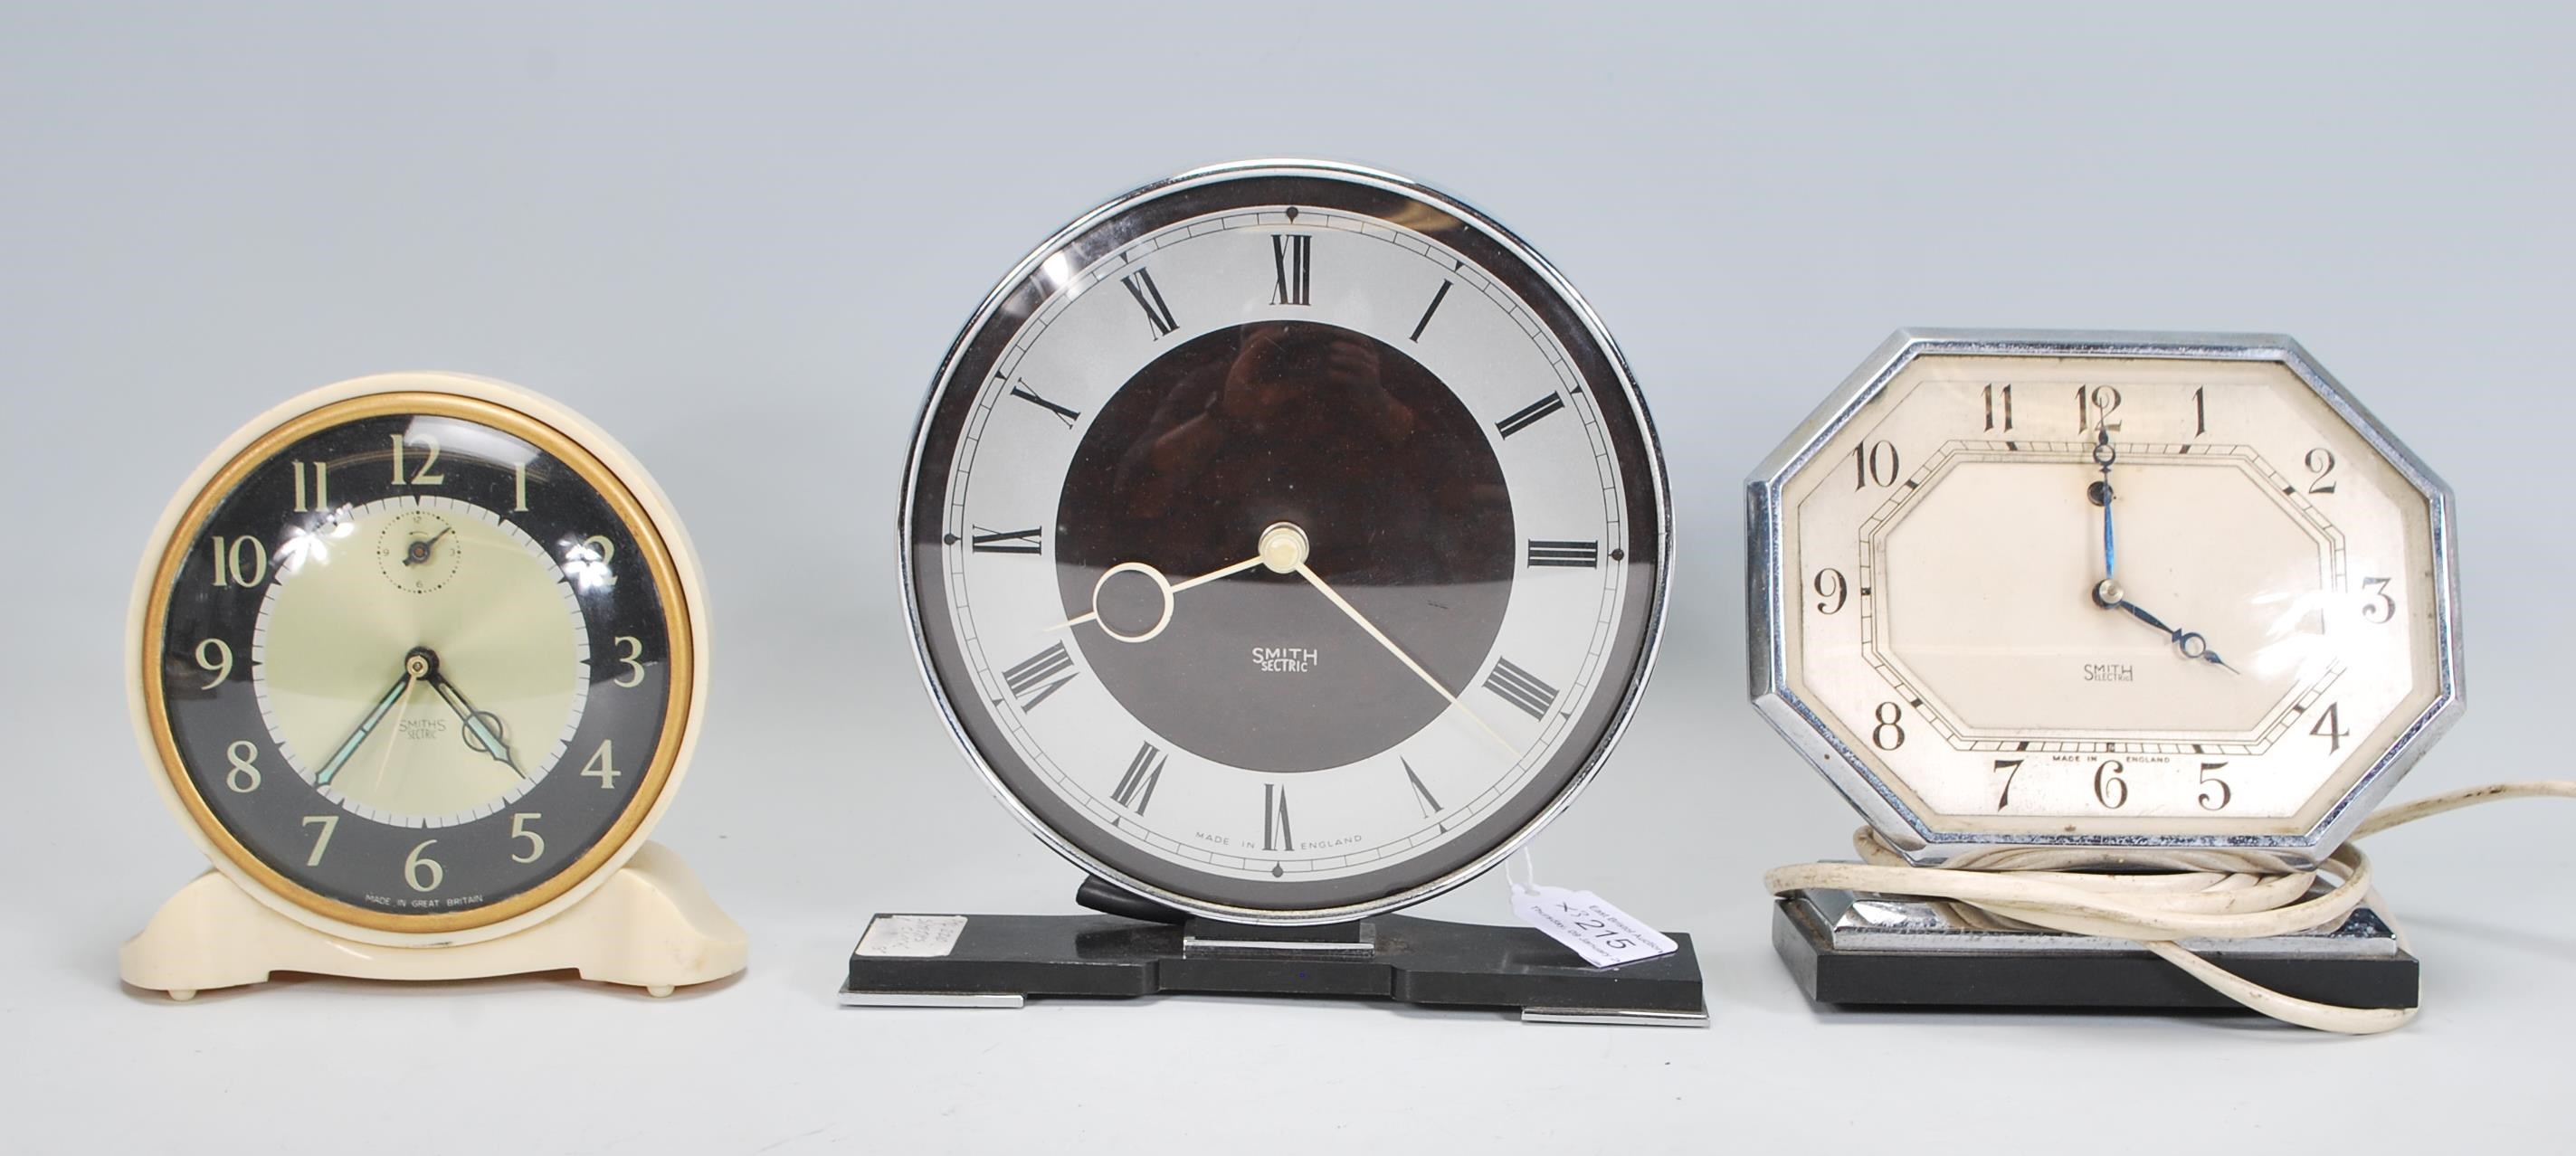 A group of three 20th Century Art deco mantel clocks by Smith Sectric and one Smith Electric. One of